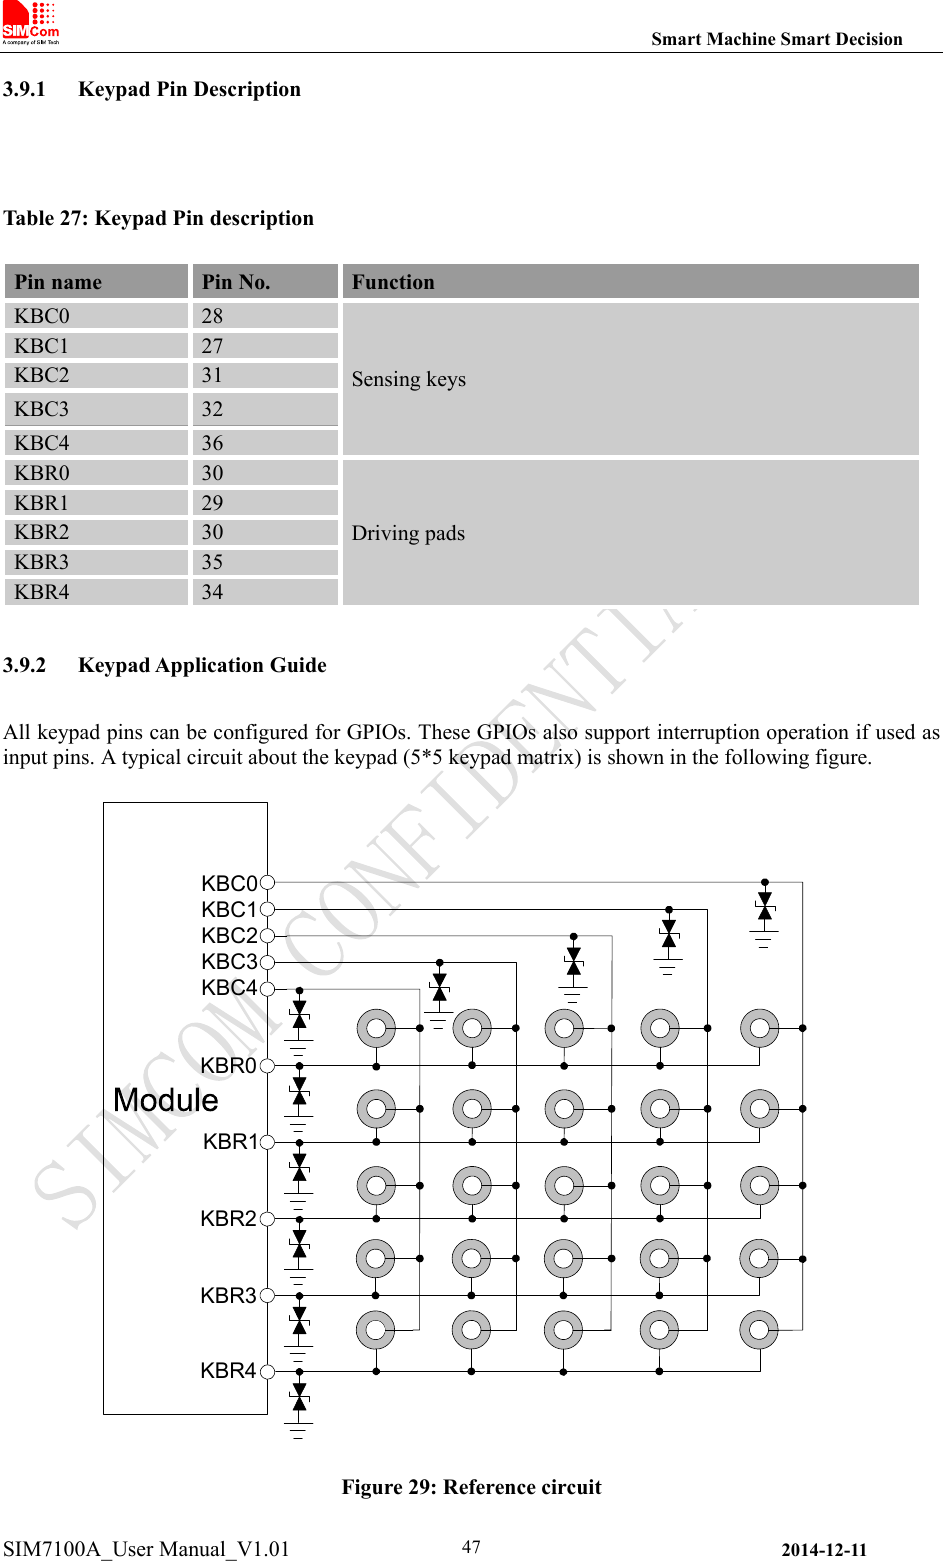                                                                Smart Machine Smart Decision SIM7100A_User Manual_V1.01                2014-12-11 473.9.1 Keypad Pin Description  Table 27: Keypad Pin description Pin name  Pin No.  Function KBC0  28 Sensing keys KBC1  27 KBC2  31 KBC3  32 KBC4  36 KBR0  30 Driving pads KBR1  29 KBR2  30 KBR3  35 KBR4  34 3.9.2 Keypad Application Guide All keypad pins can be configured for GPIOs. These GPIOs also support interruption operation if used as input pins. A typical circuit about the keypad (5*5 keypad matrix) is shown in the following figure.  KBR4KBR3KBR2KBR1KBR0KBC0KBC1KBC2KBC3KBC4 Figure 29: Reference circuit 